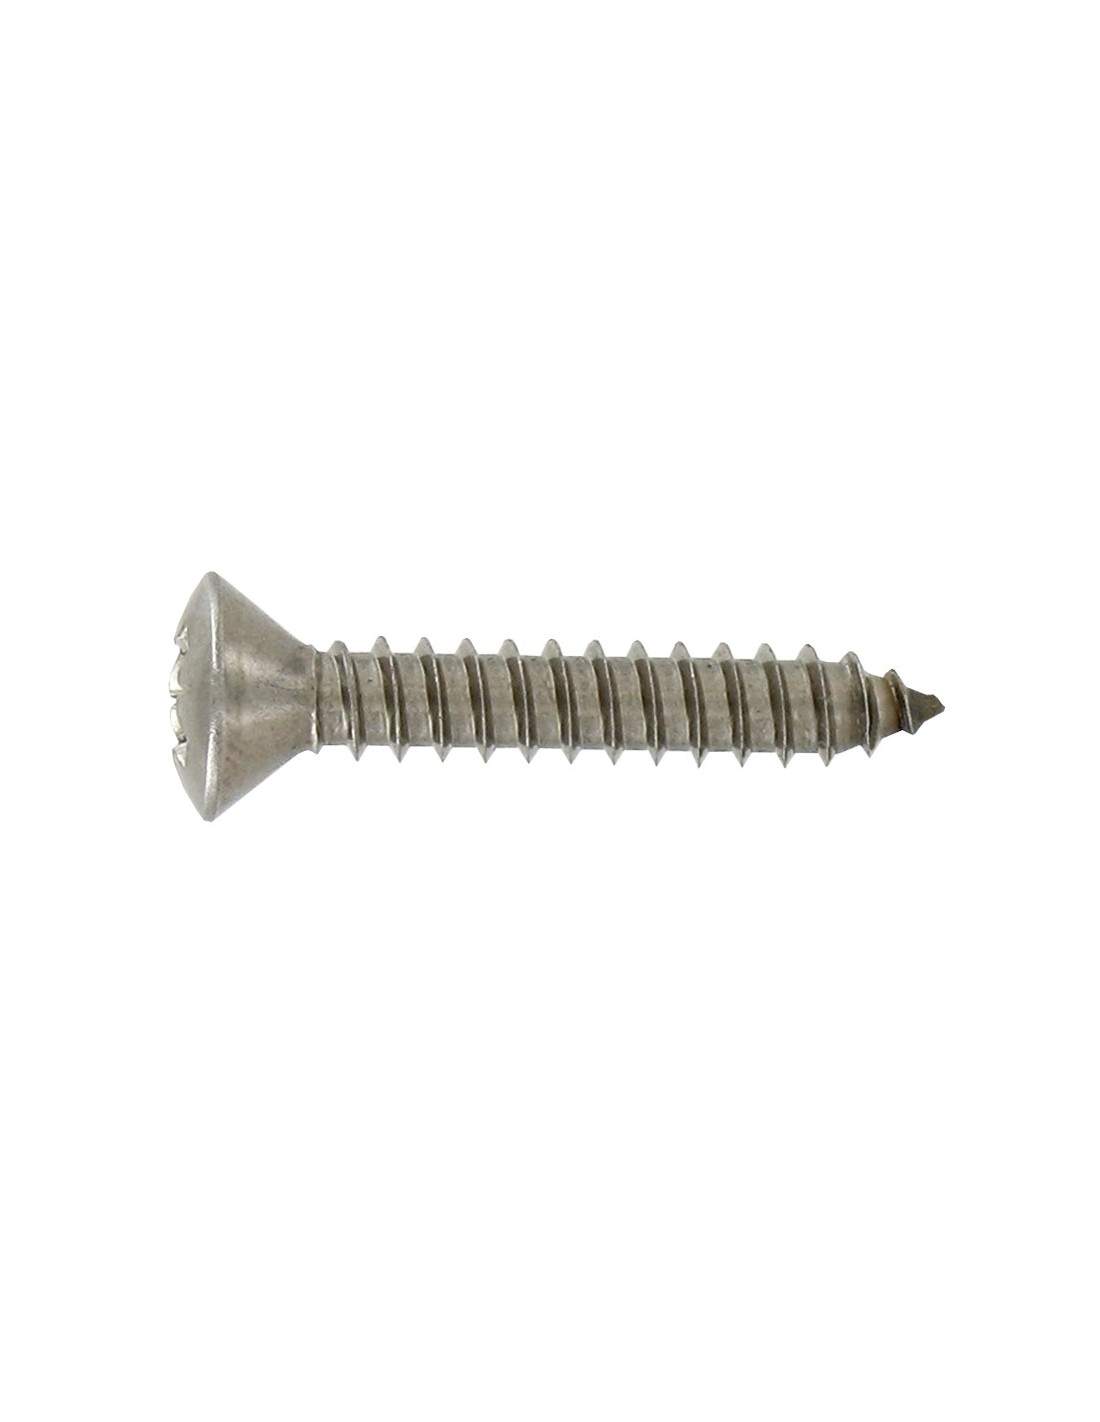 Countersunk-head tapping screw, stainless steel A4 3.9x25, 20 pcs.